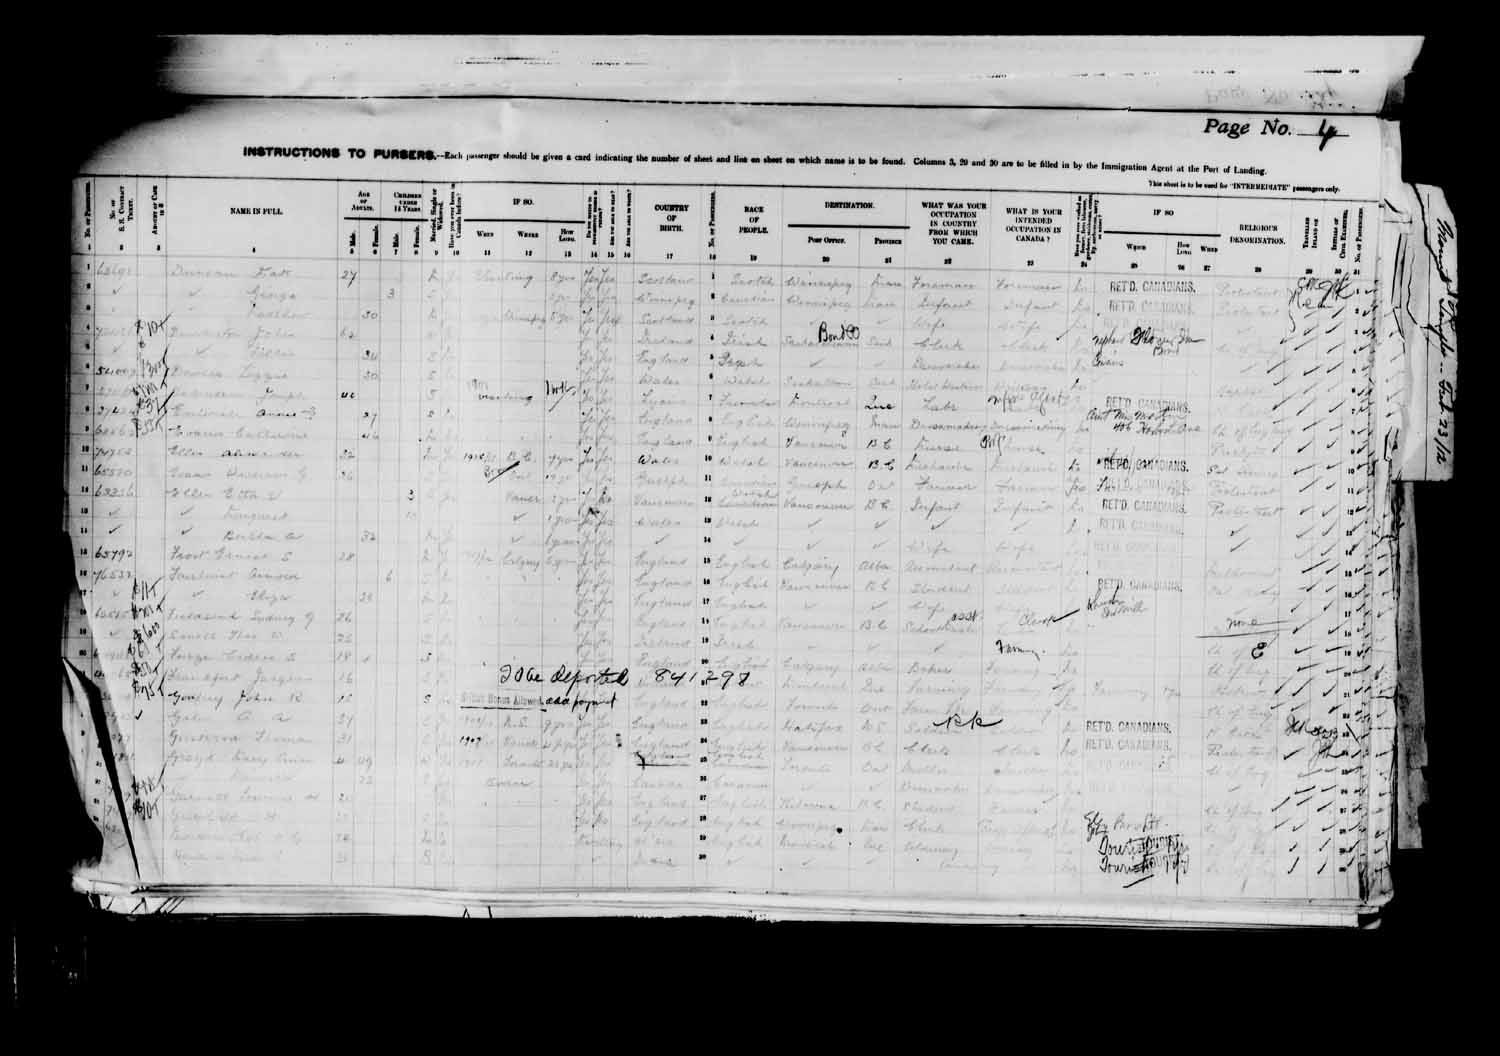 Digitized page of Passenger Lists for Image No.: e003627177